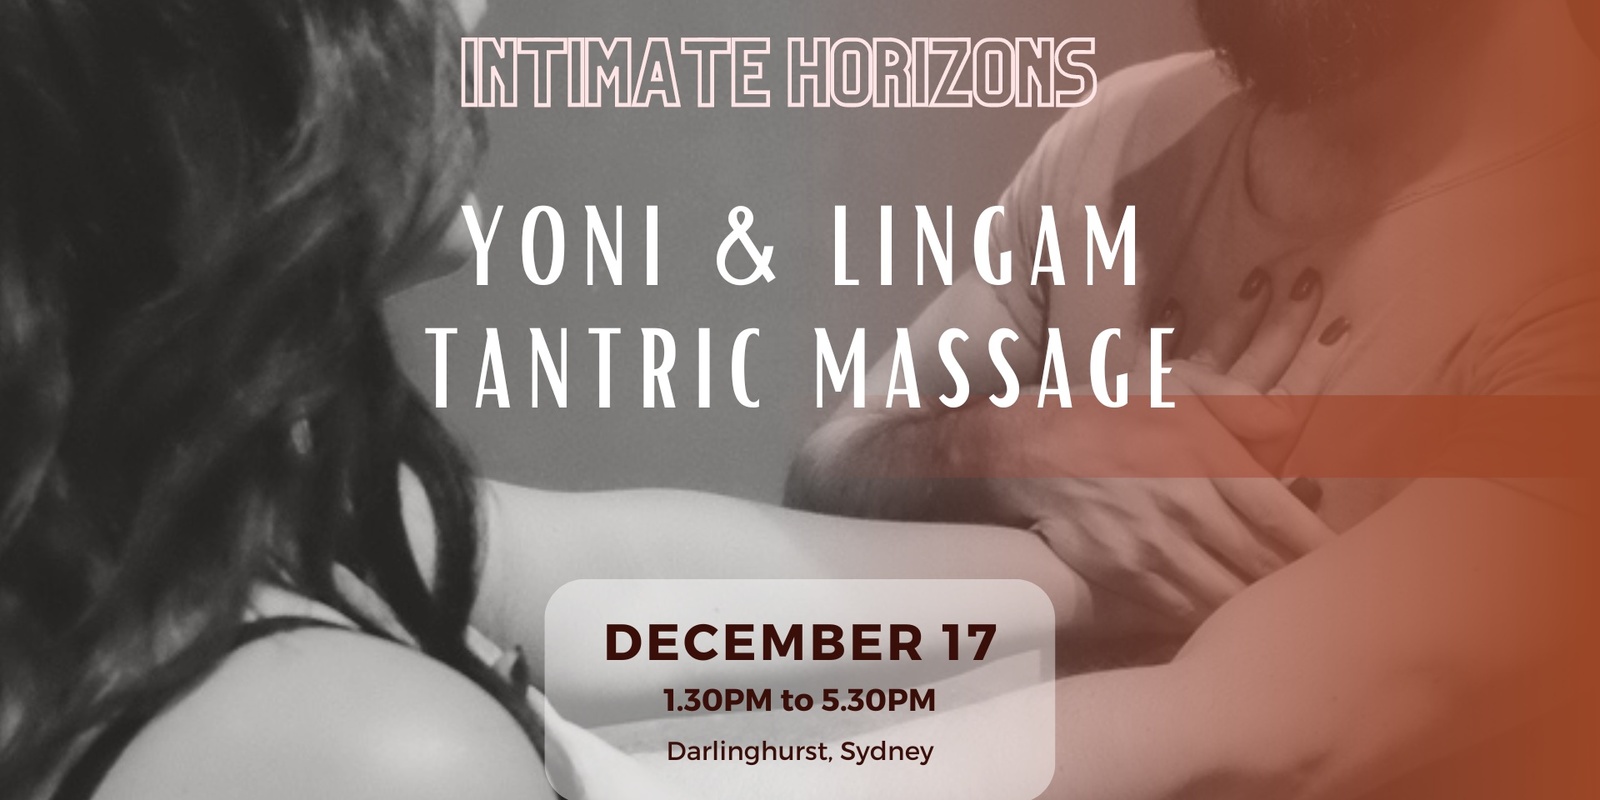 ahmed als recommends lingam or yoni massage pic